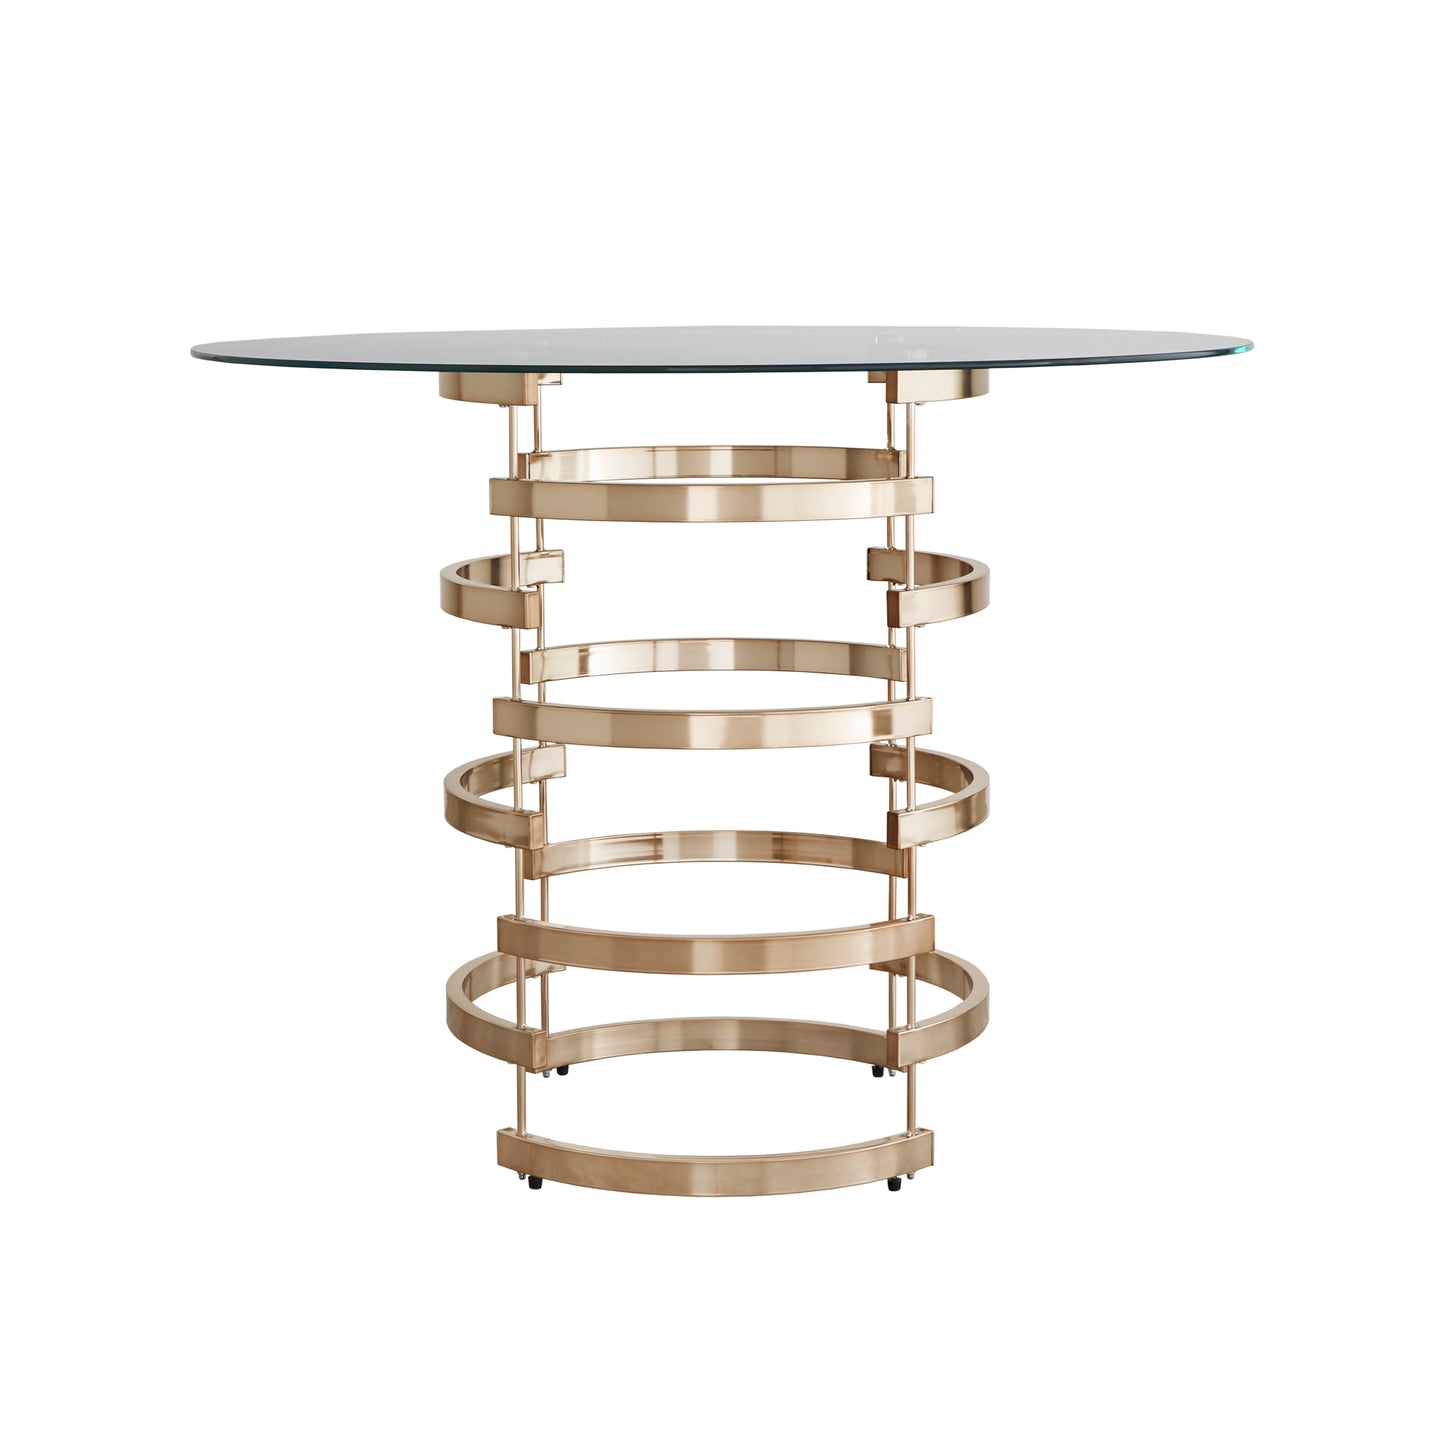 Vortex Base Counter Height Dining Table - Champagne Gold